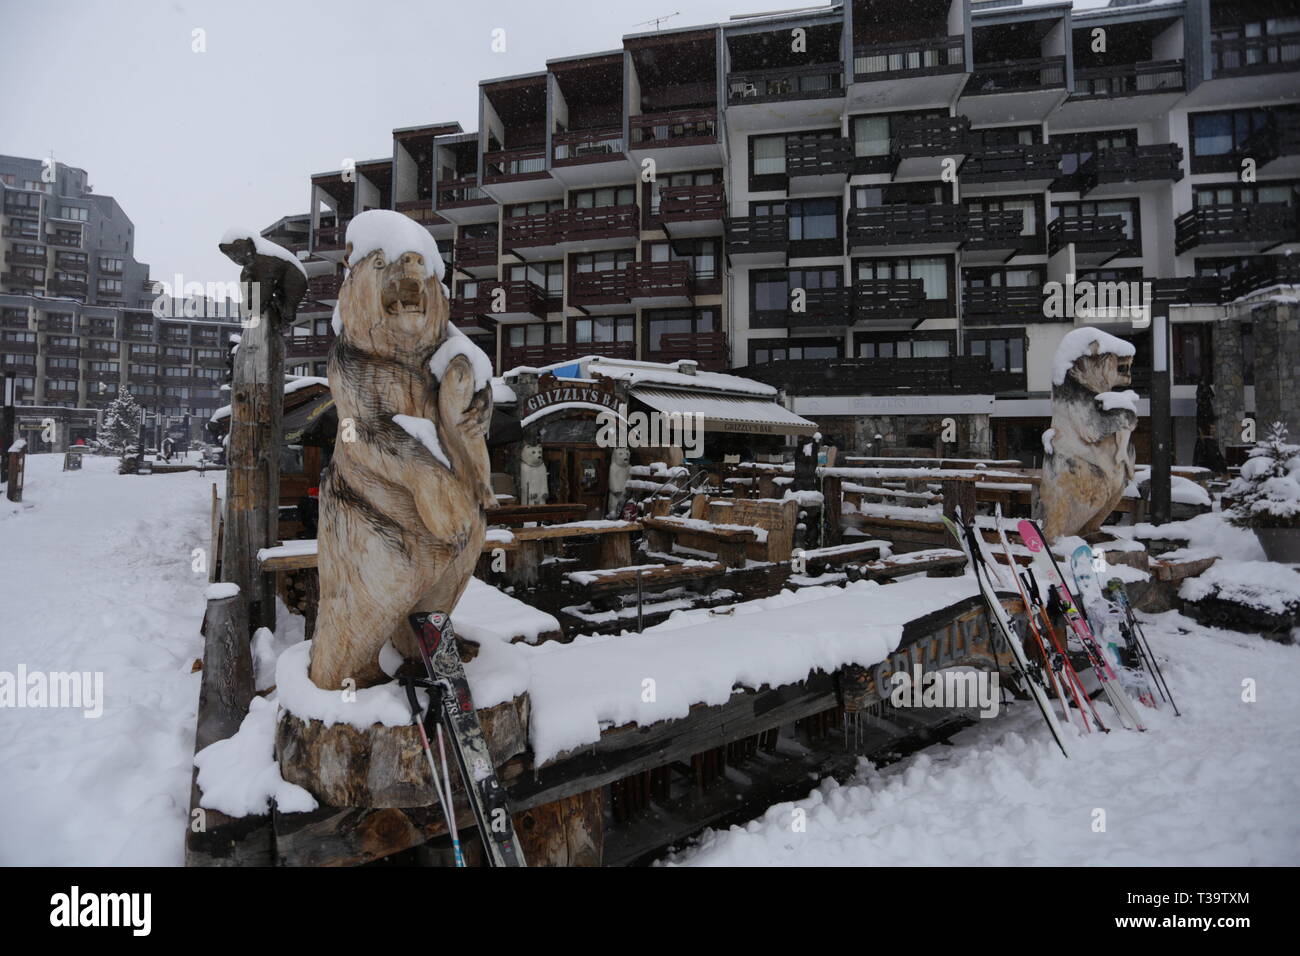 Grizzly's bar wood carvings, Tignes Le Lac/ Tignes 2100, France Stock Photo